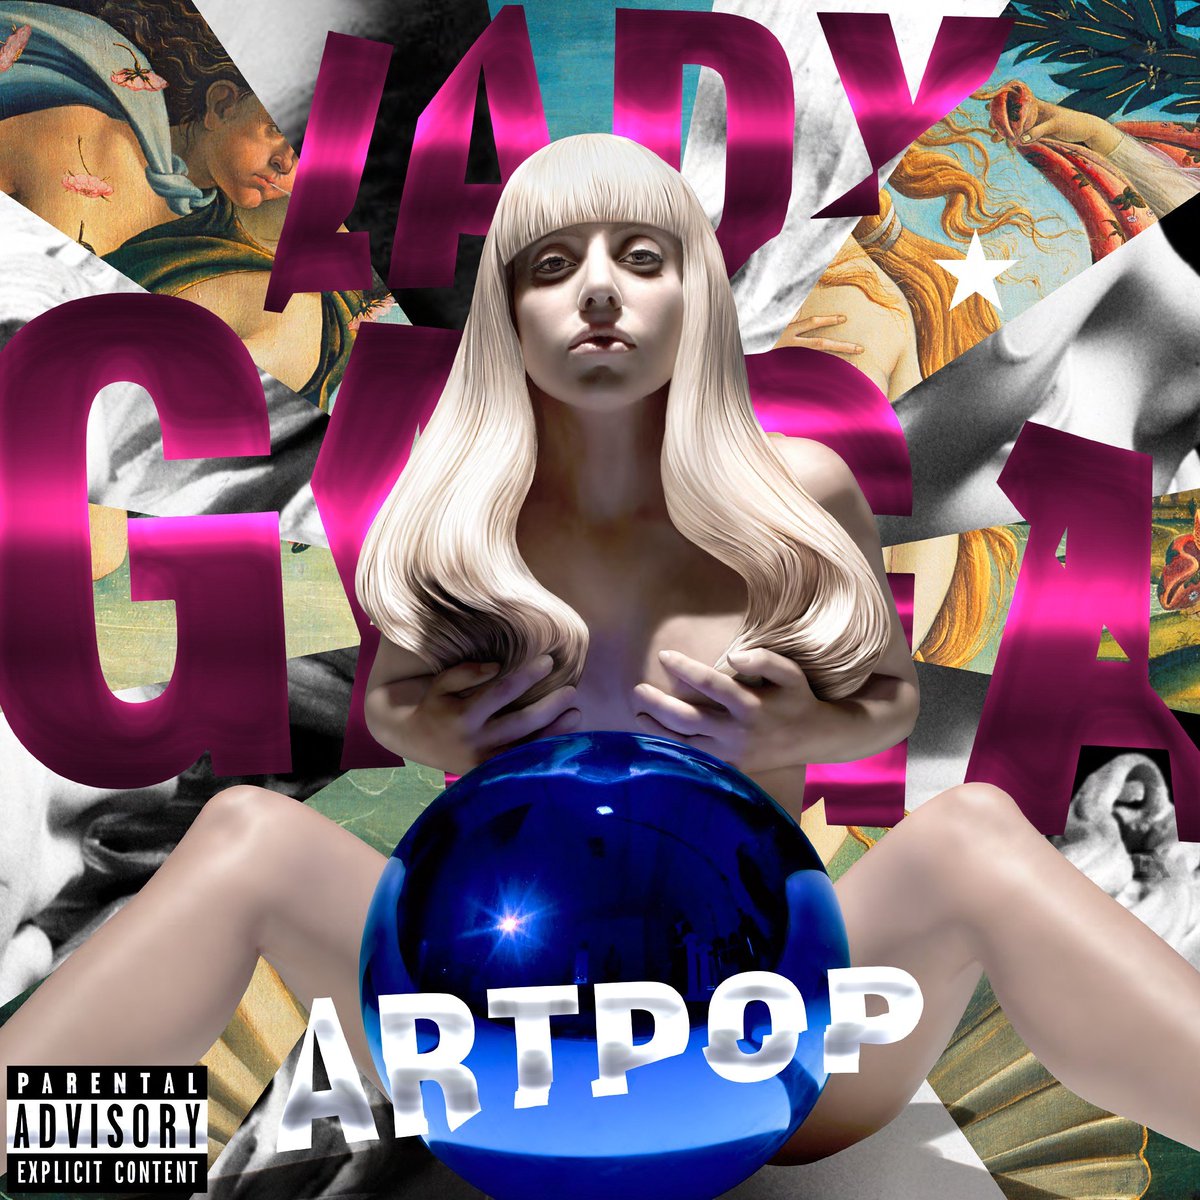 Why Lady Gaga should not get dragged for ARTPOP's "poor" sales [THREAD]